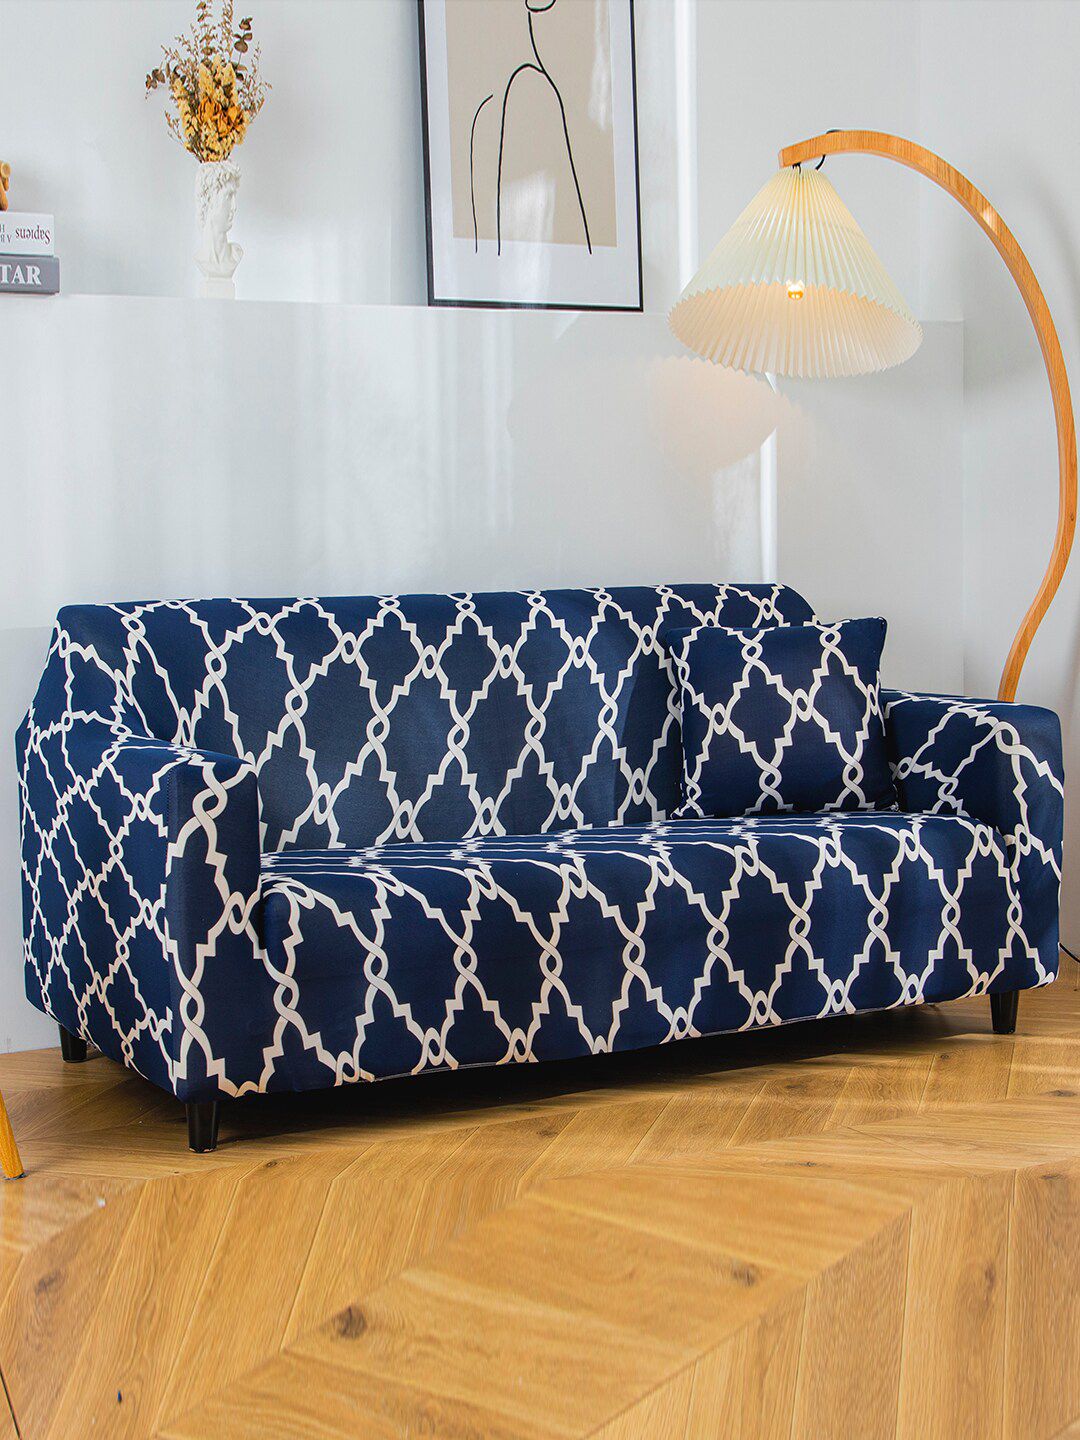 HOUSE OF QUIRK Navy Blue Lantern 2-Seater Stretchable Sofa Cover Price in India